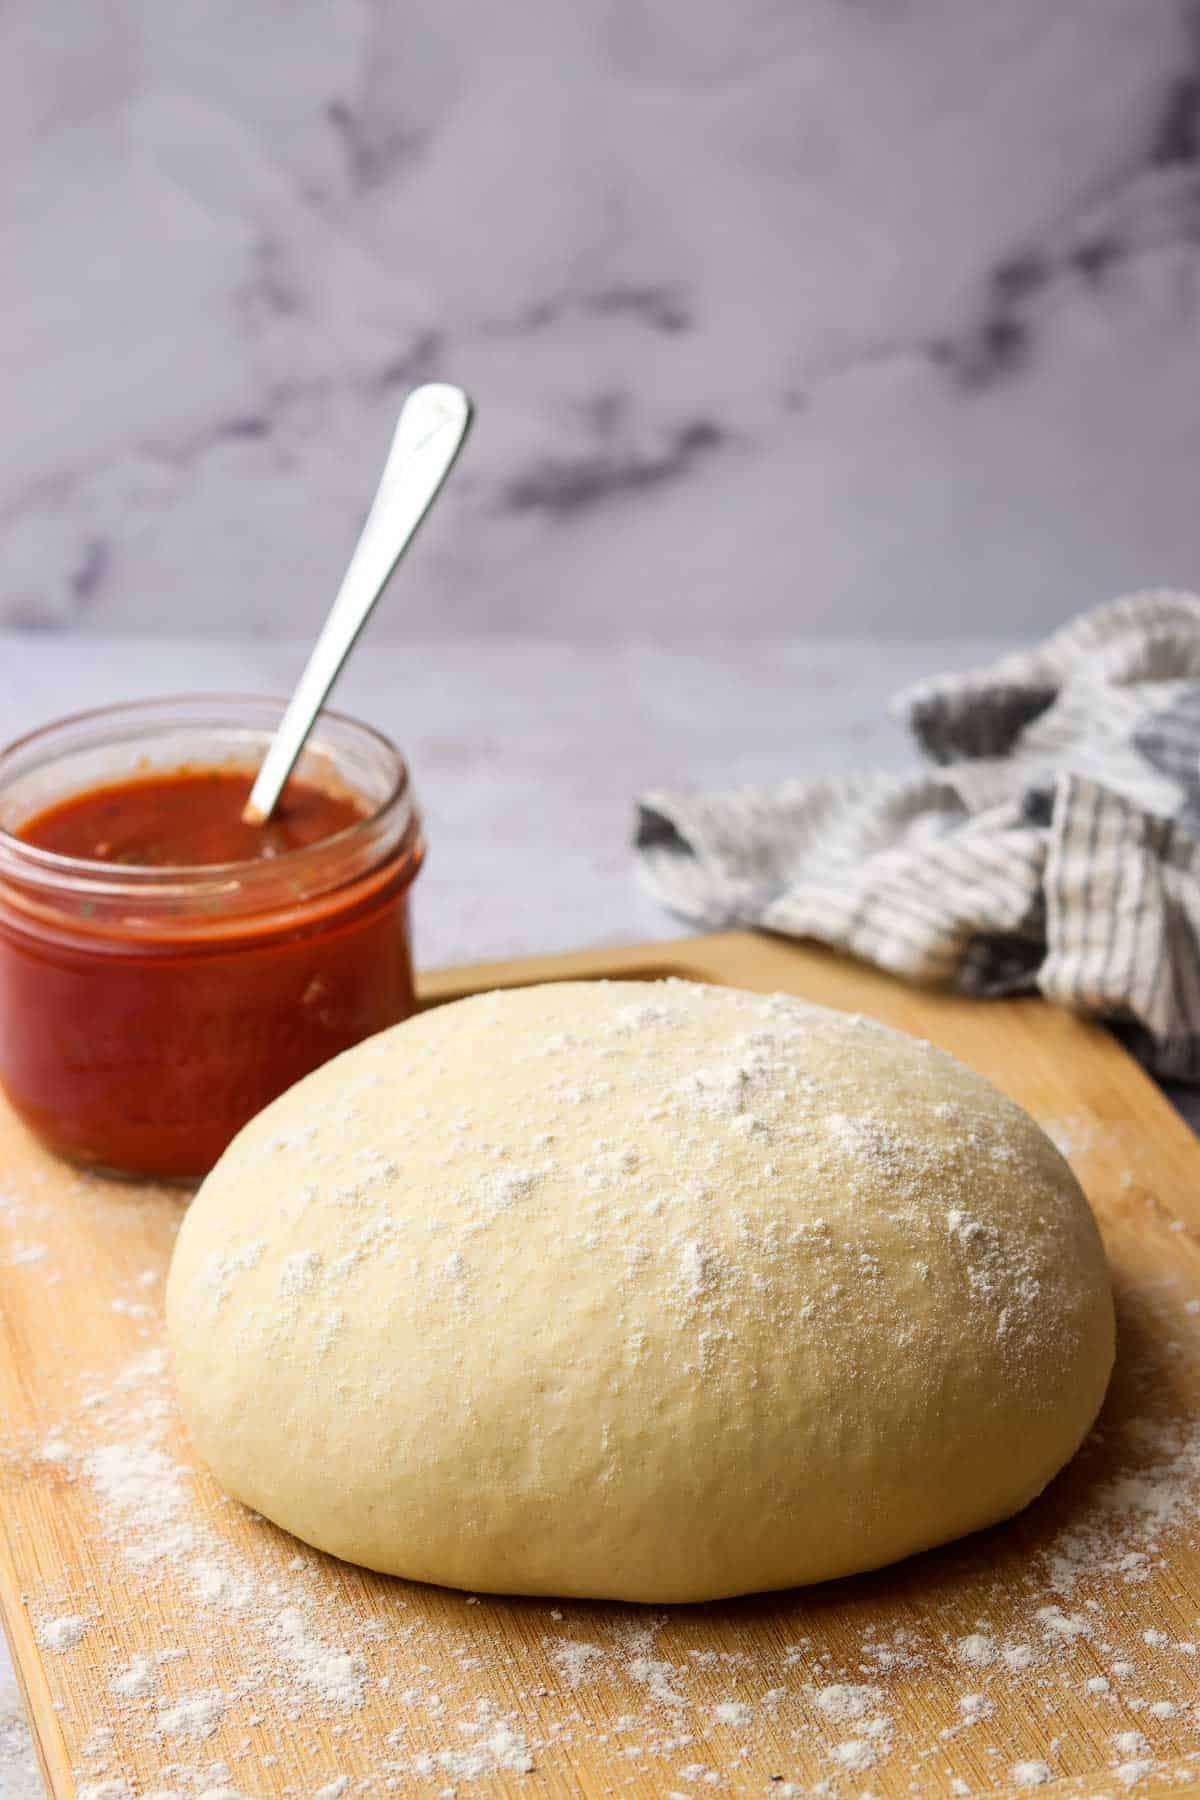 Side view of a ball of raw pizza dough sprinkled with flour on a wooden cutting board with a jar of pizza sauce in the background.